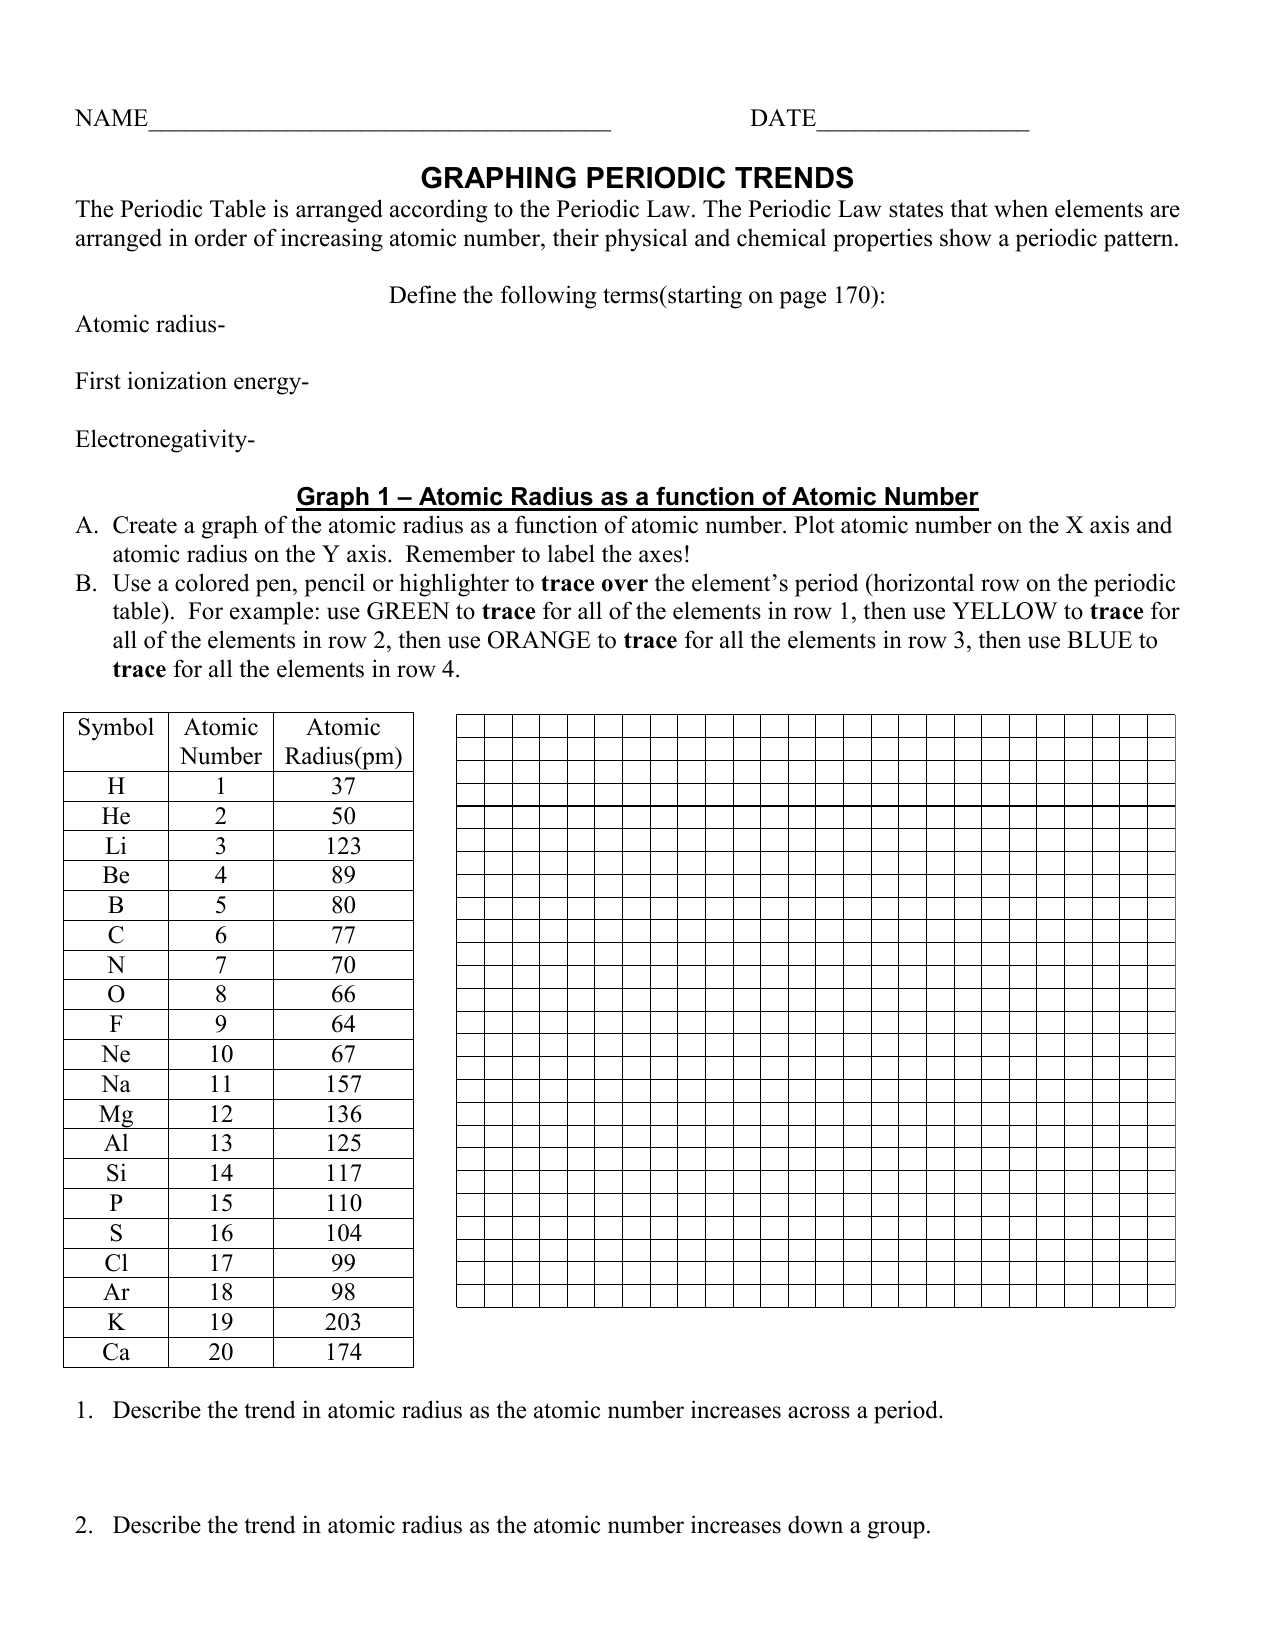 Graphing-periodic-trends In Periodic Trends Worksheet Answers